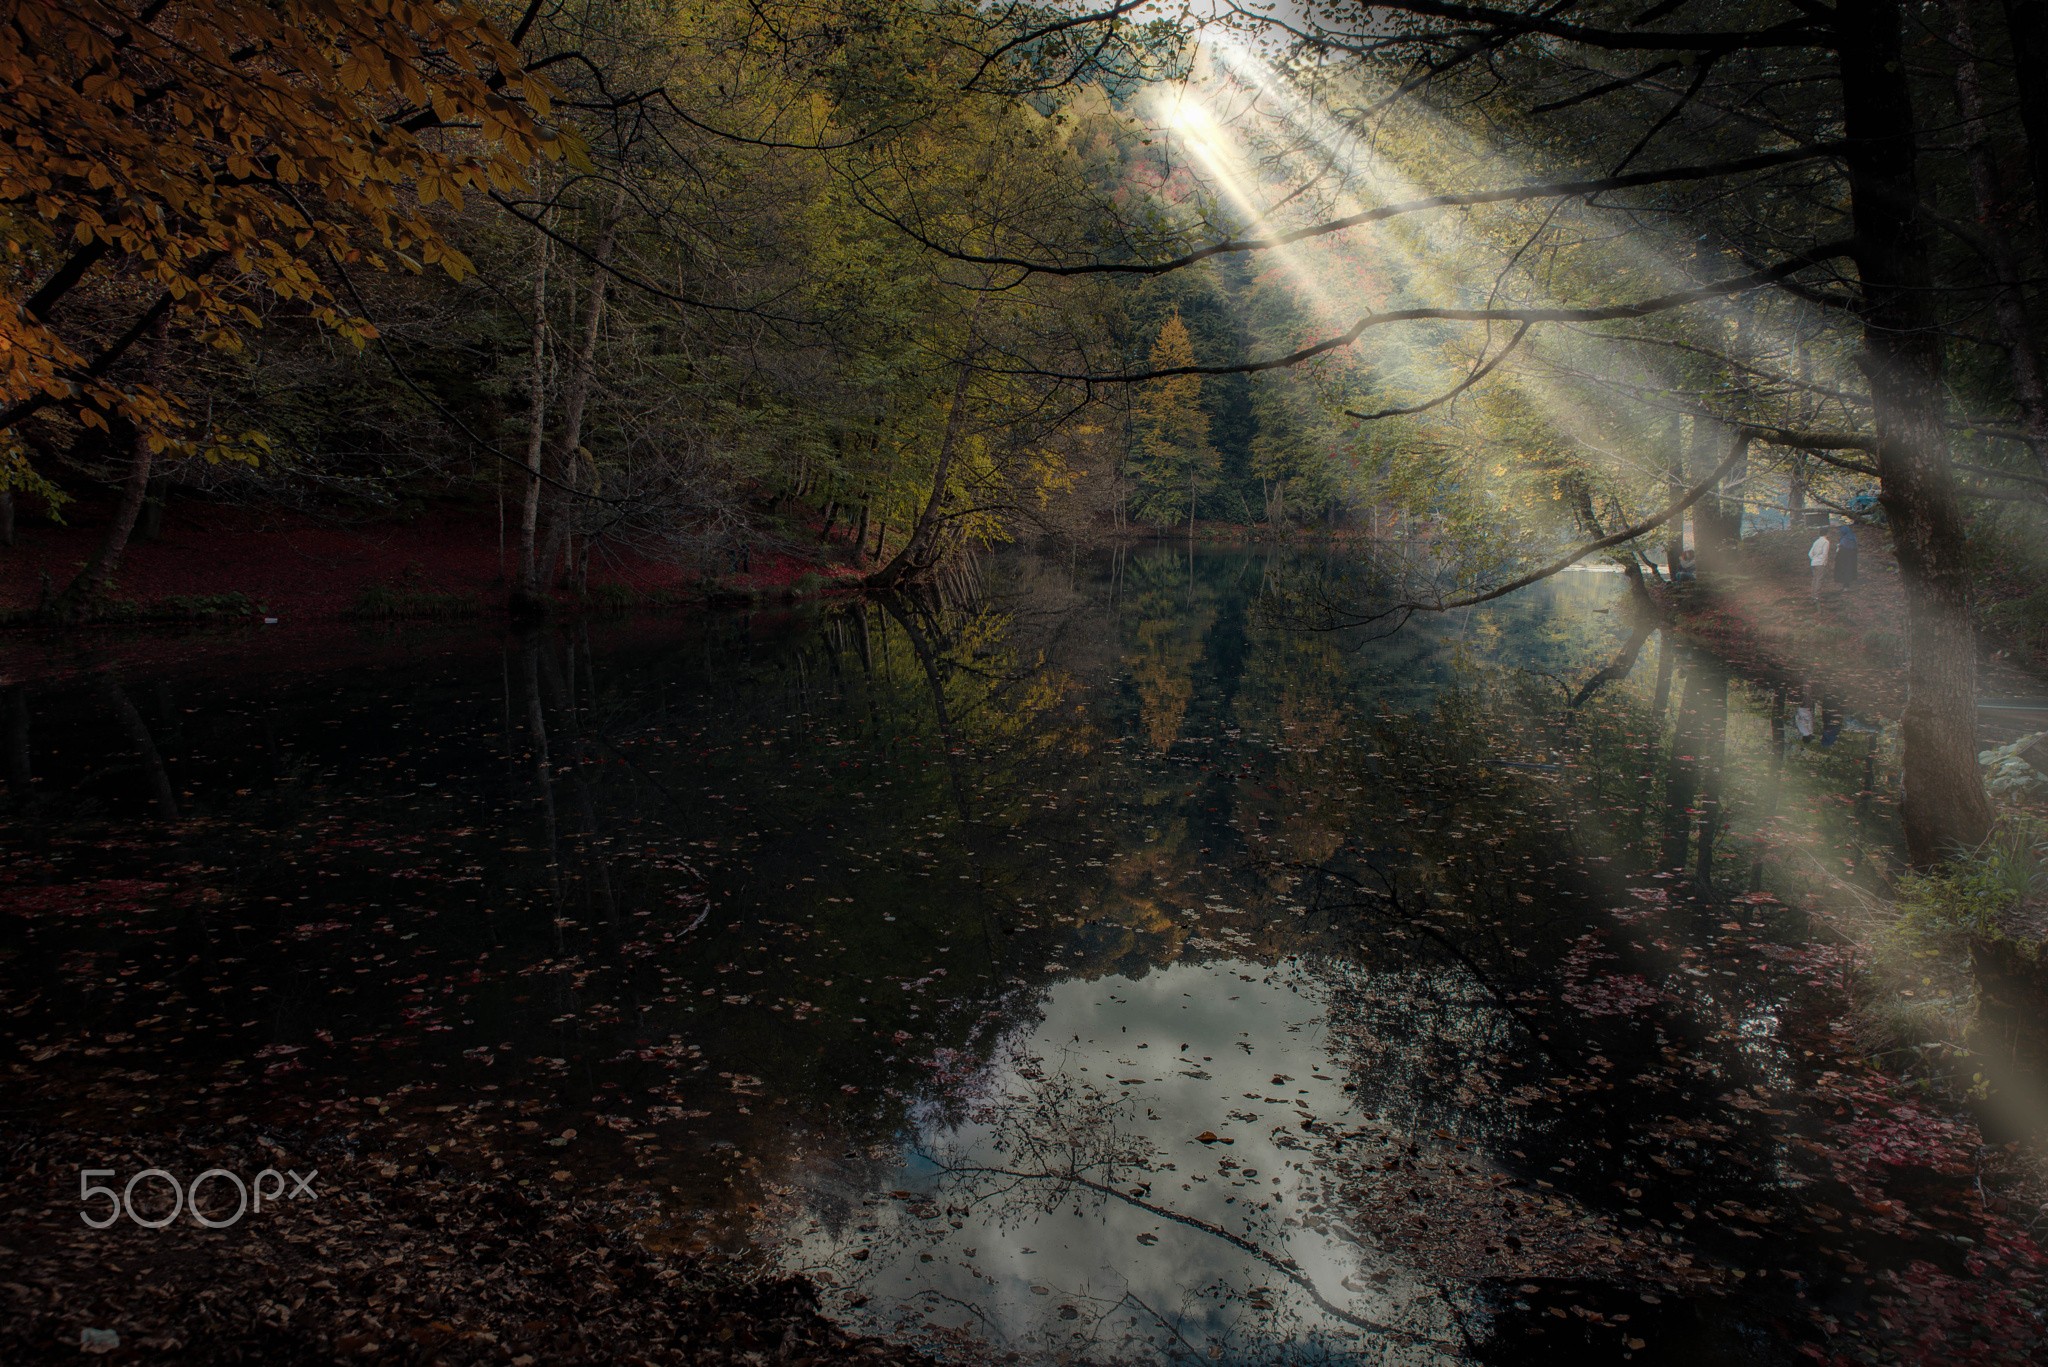 General 2048x1367 wilderness dappled sunlight sun rays fall forest river nature outdoors trees 500px watermarked